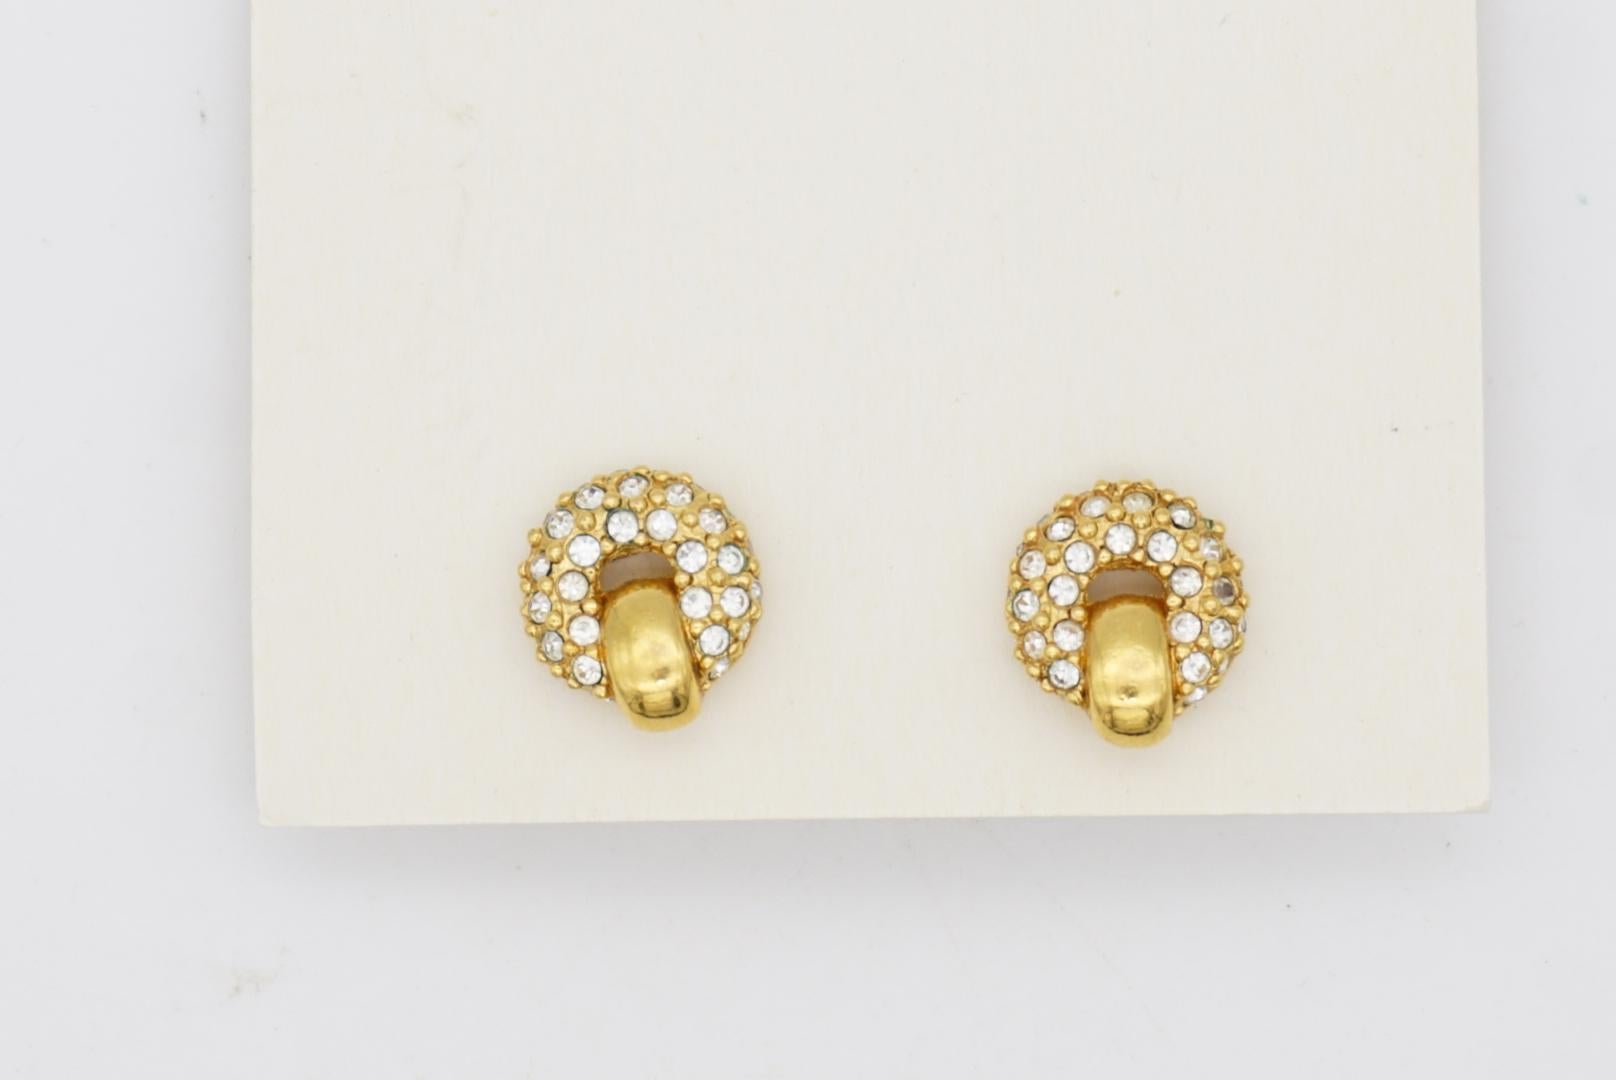 Christian Dior GROSSE 1960s Whole Crystals Circle Knot Openwork Gold Earrings 3